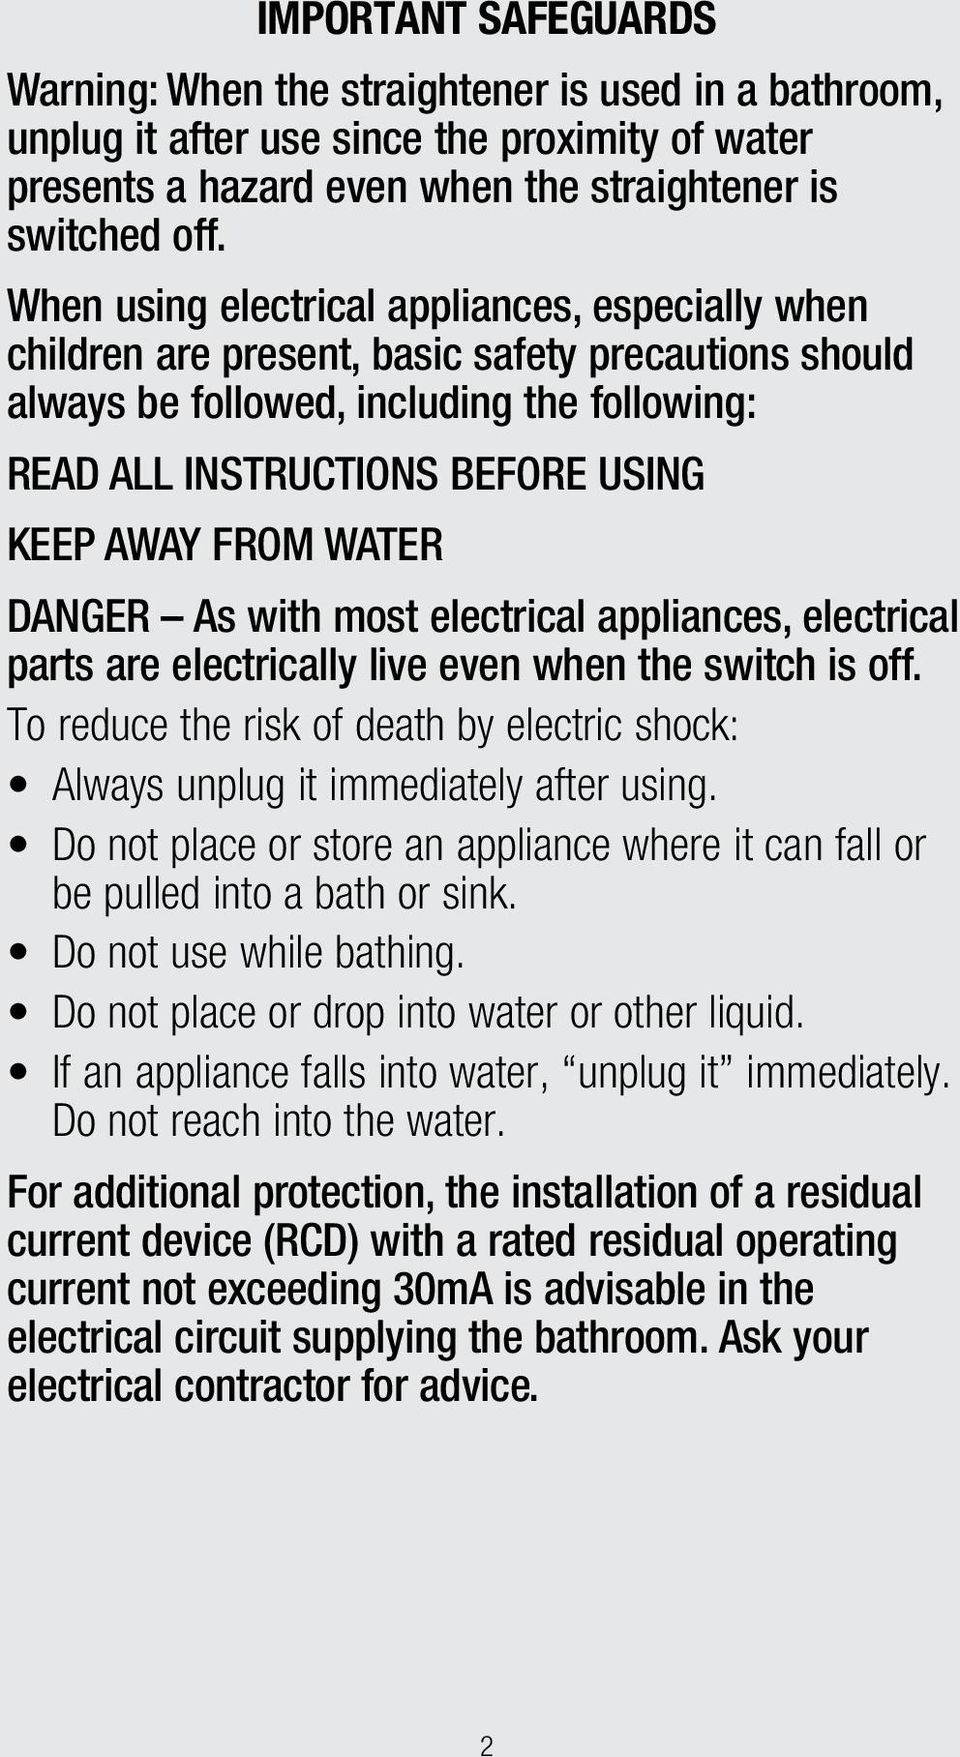 WATER DANGER As with most electrical appliances, electrical parts are electrically live even when the switch is off.